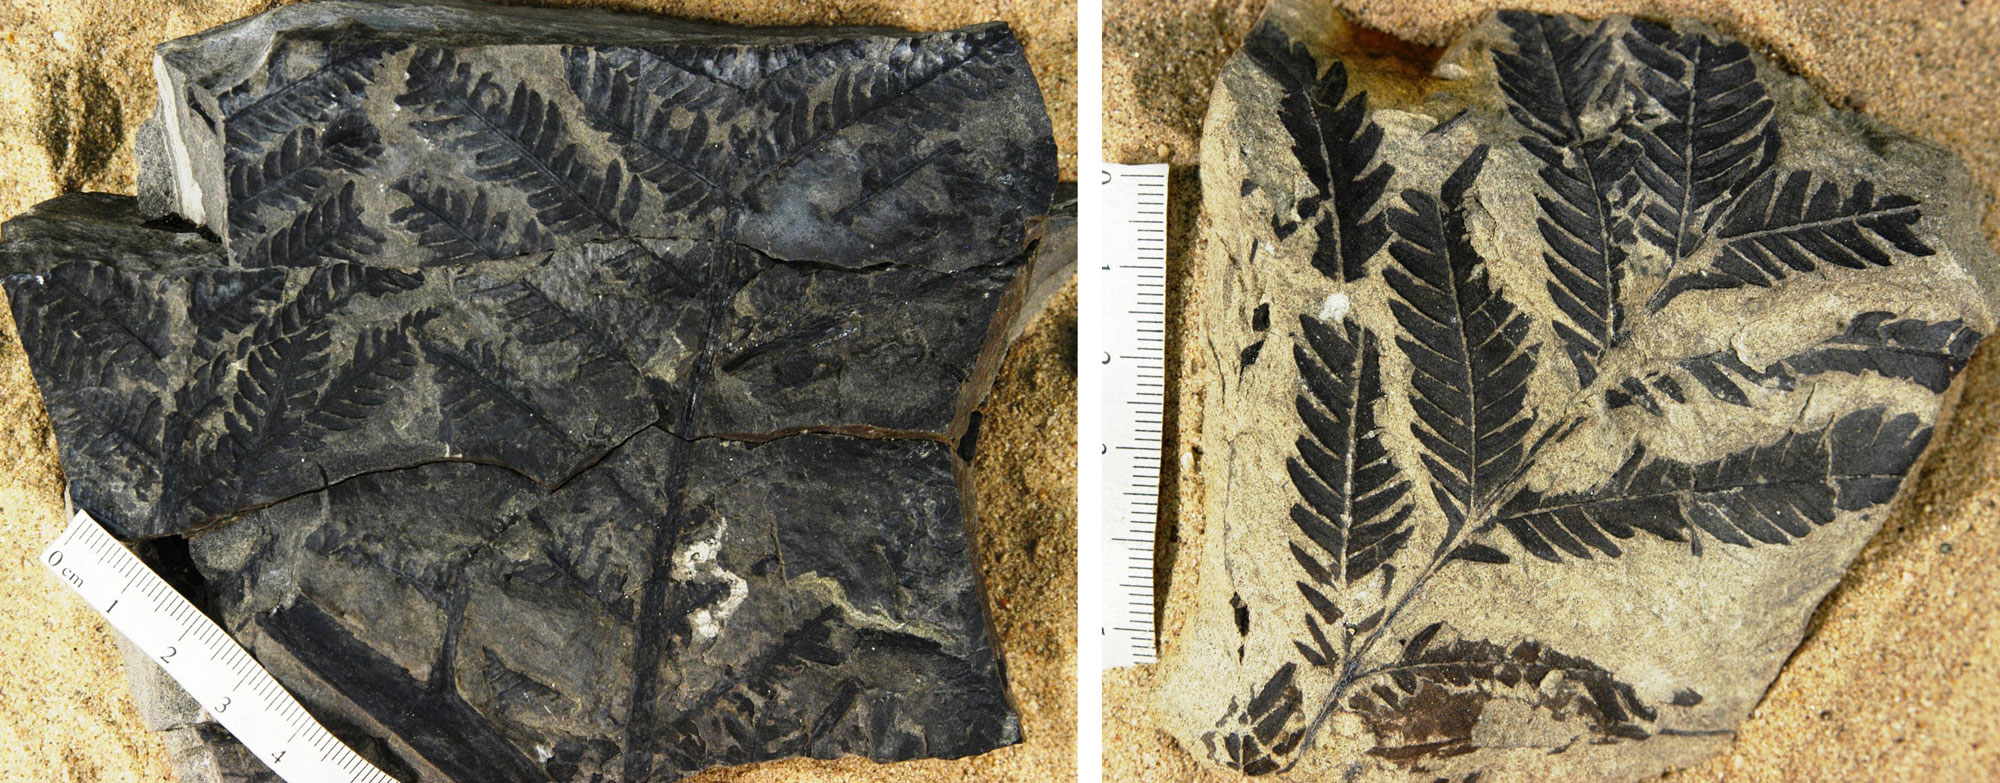 2-panel image of photos of fossil fern leaves from the Early Cretaceous of Washington. Panel 1: Fronds from a member of the royal fern family. Each frond has a central rachis with lateral pinnae, each bearing pinnules (leaflets). Panel 2: Frond of a member of the forking fern order, with a central rachis and lateral pinnae, each bearing pinnules.